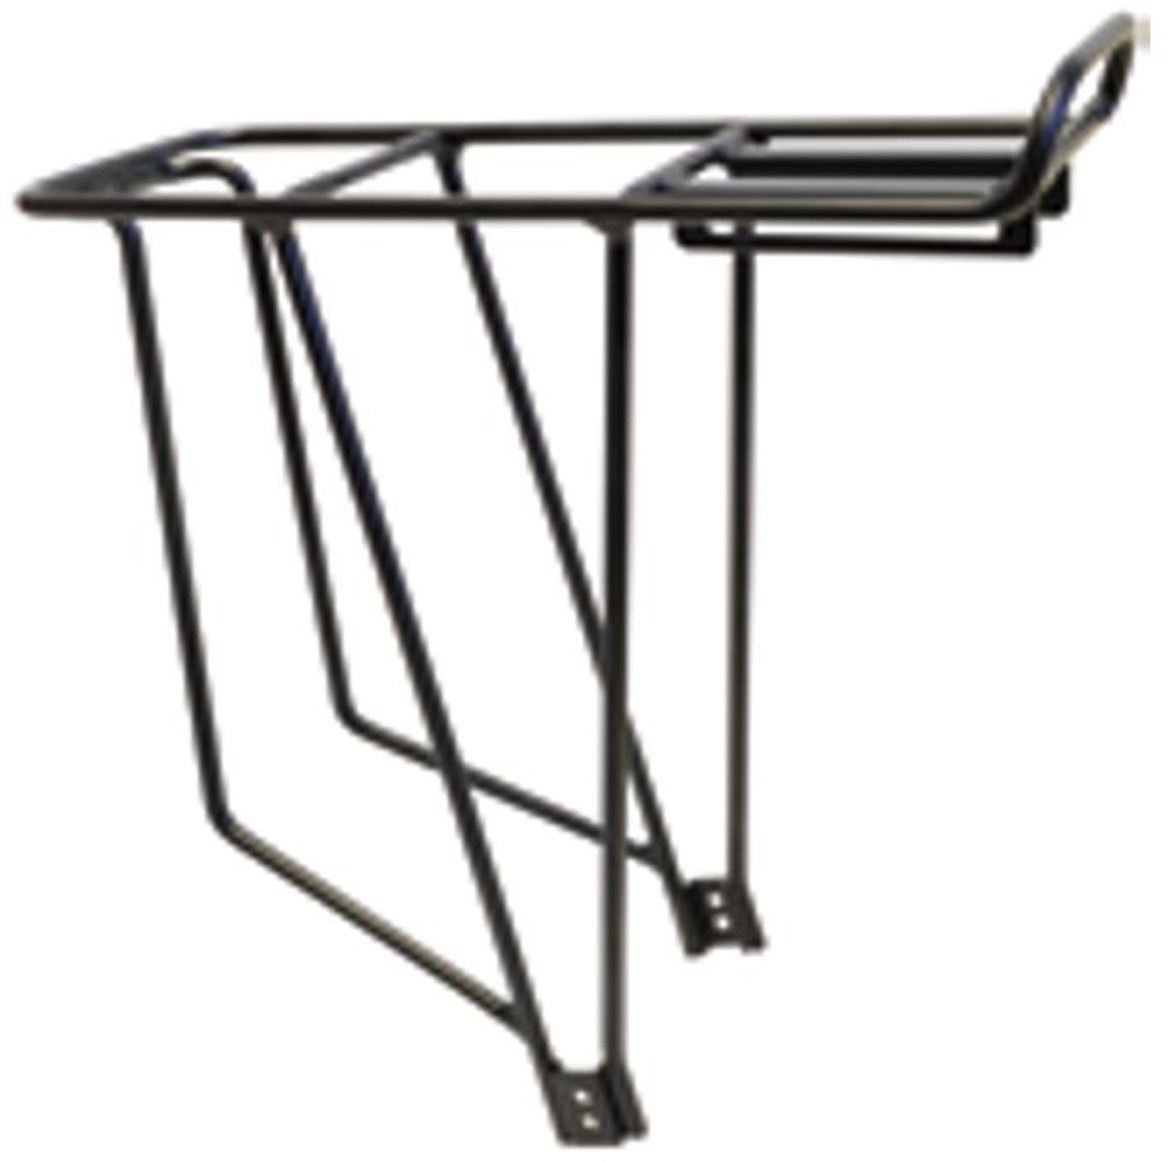 Oxford 26/27 inch /700c Alloy Adjustable Luggage Carrier Rear Bike Rack product image